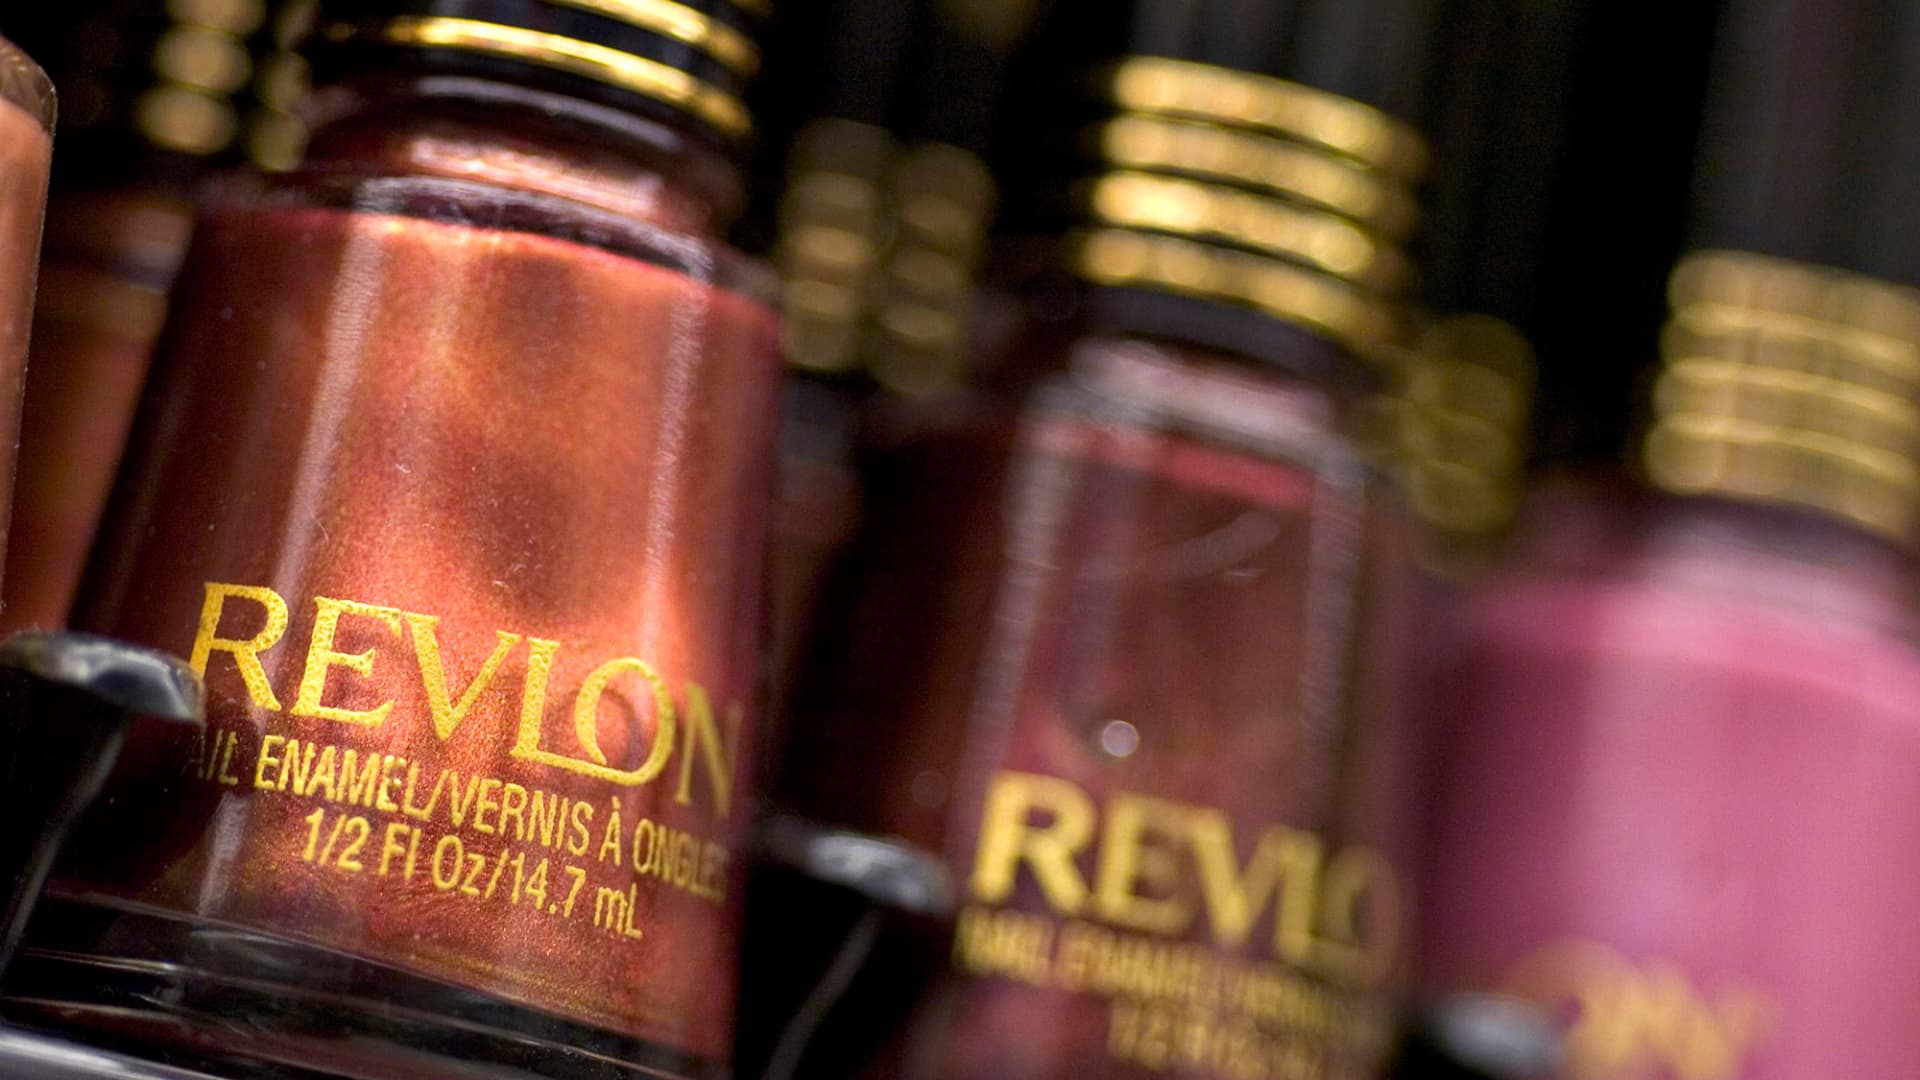 Cosmetics giant Revlon files for Chapter 11 bankruptcy protection